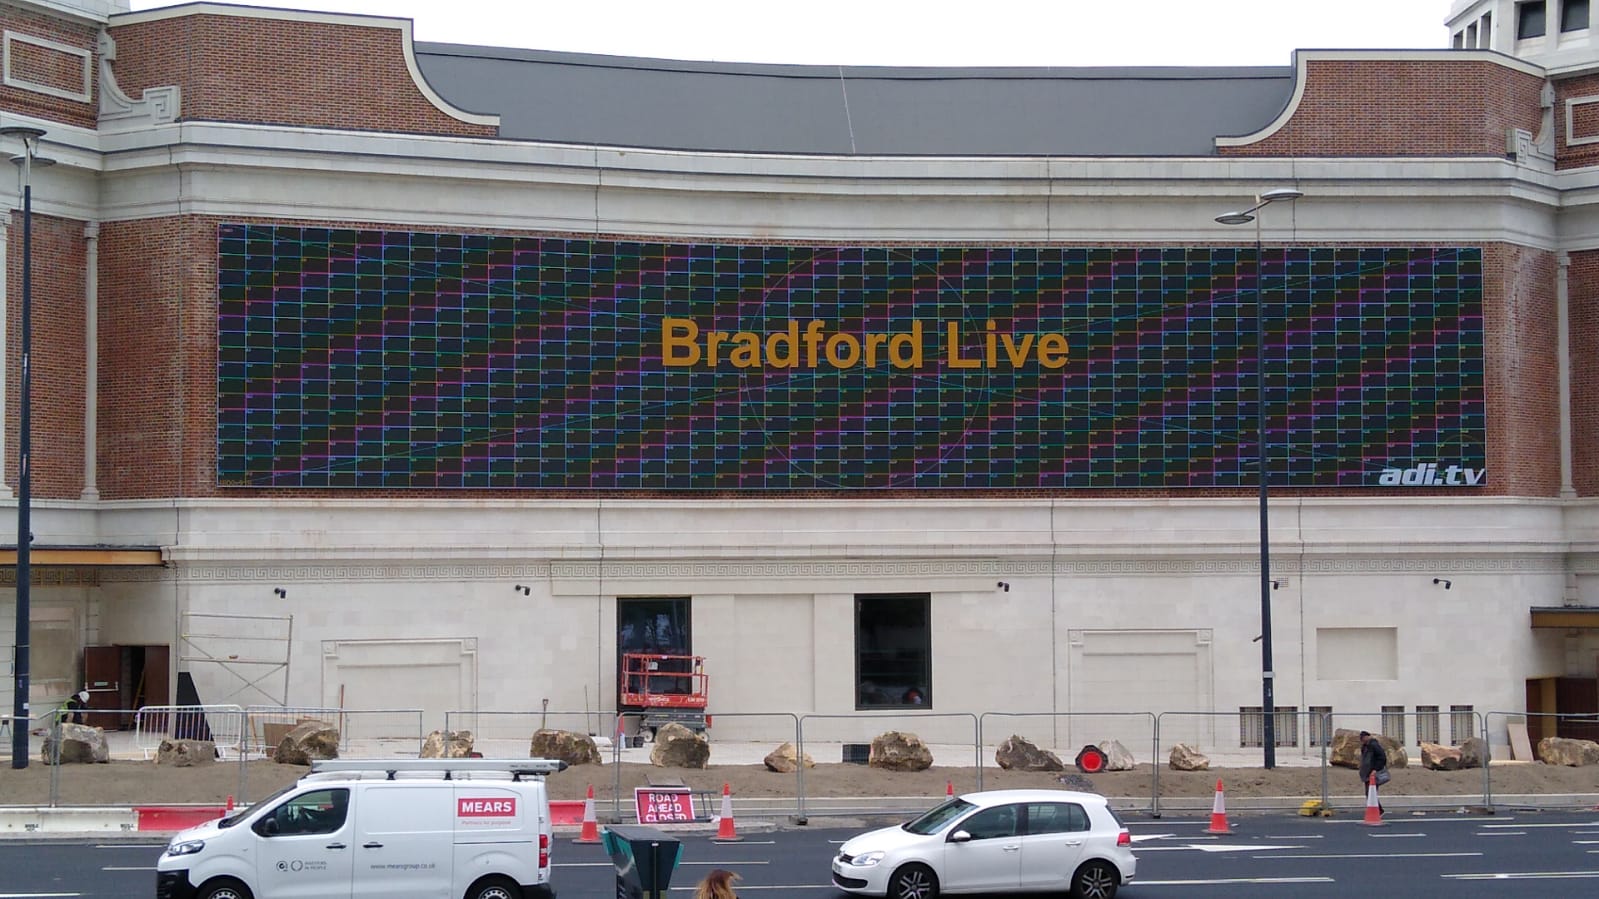 The words ‘Bradford Live’ appear on big screen…